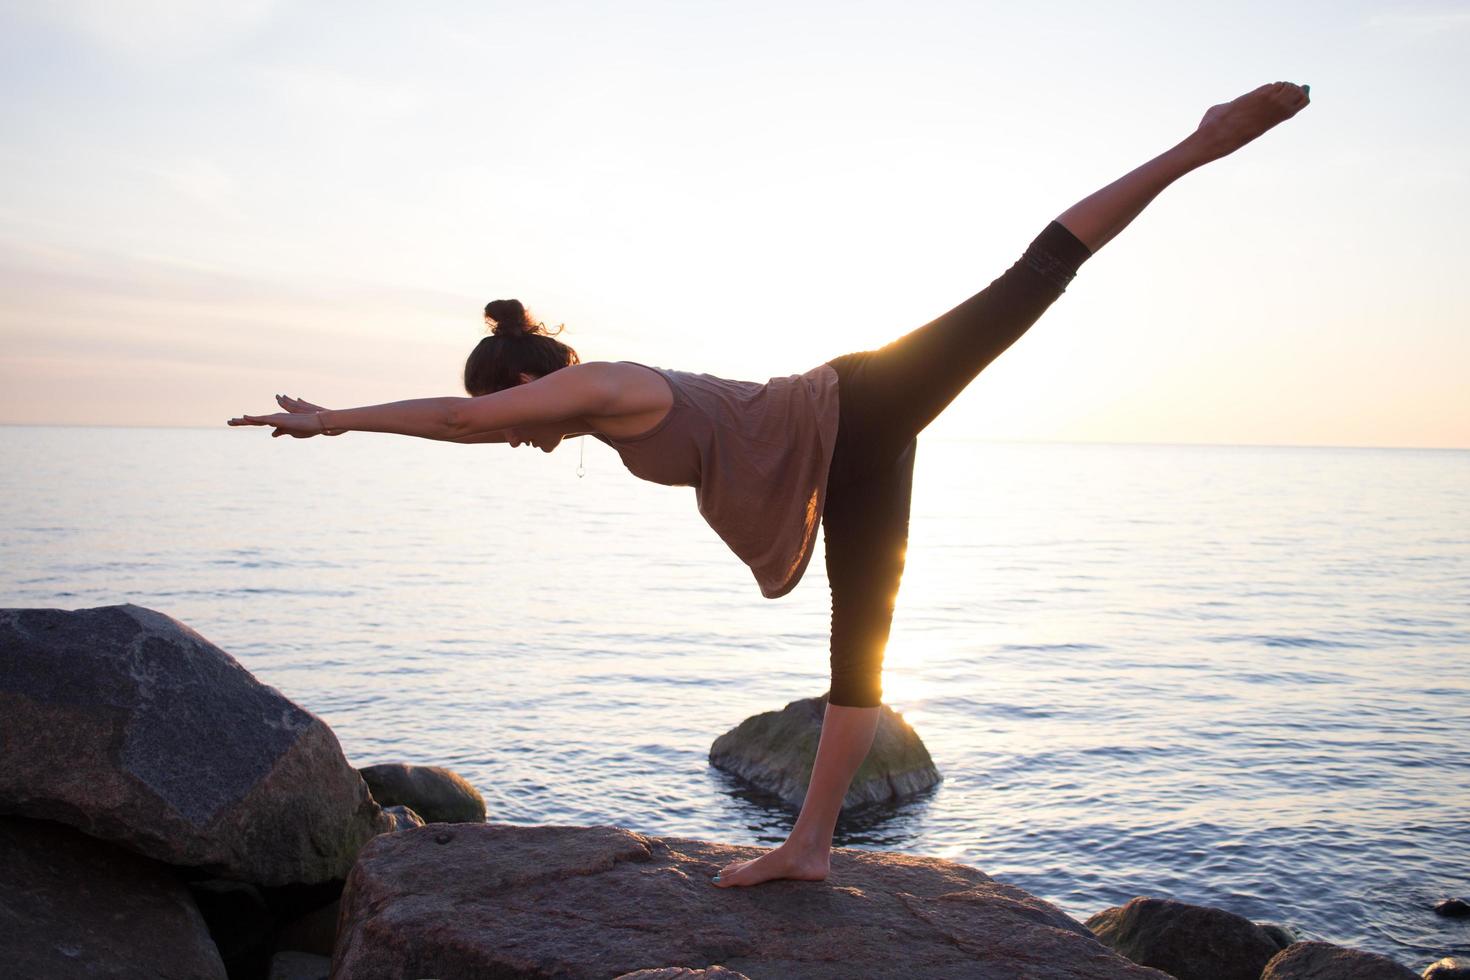 fitness mixed race asian woman in yoga pose on the morning beach, beautiful fit woman practice fitness exrxise stones, morning sea or ocean background photo